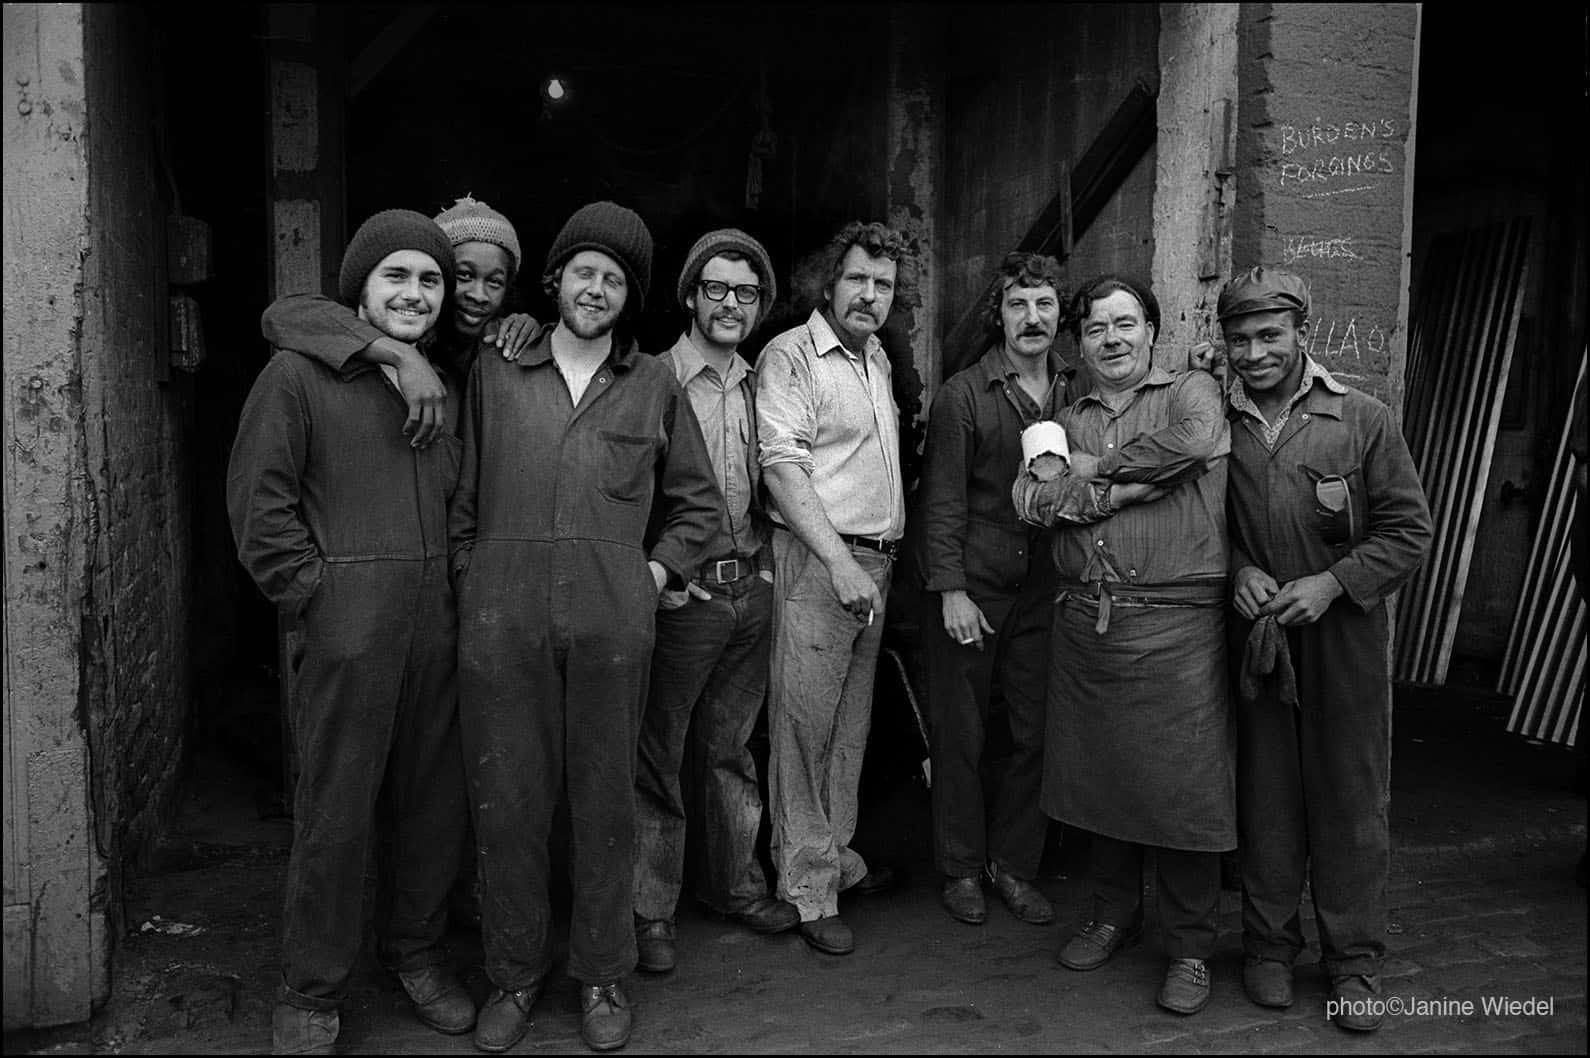 Smiths Drop Forge in Aston Birmingham in the 1970s